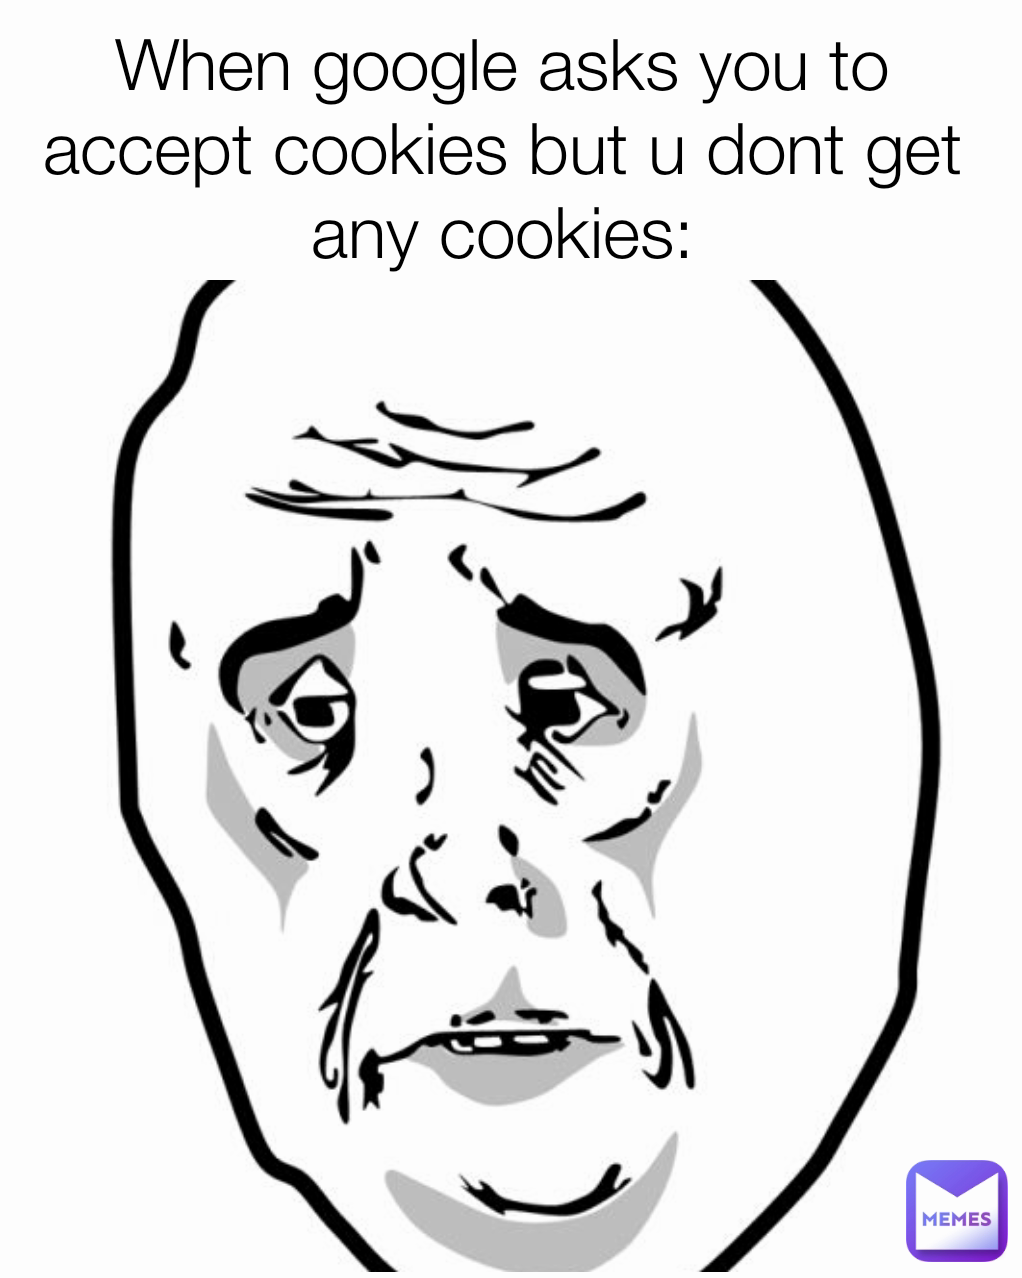 When google asks you to accept cookies but u dont get any cookies:
